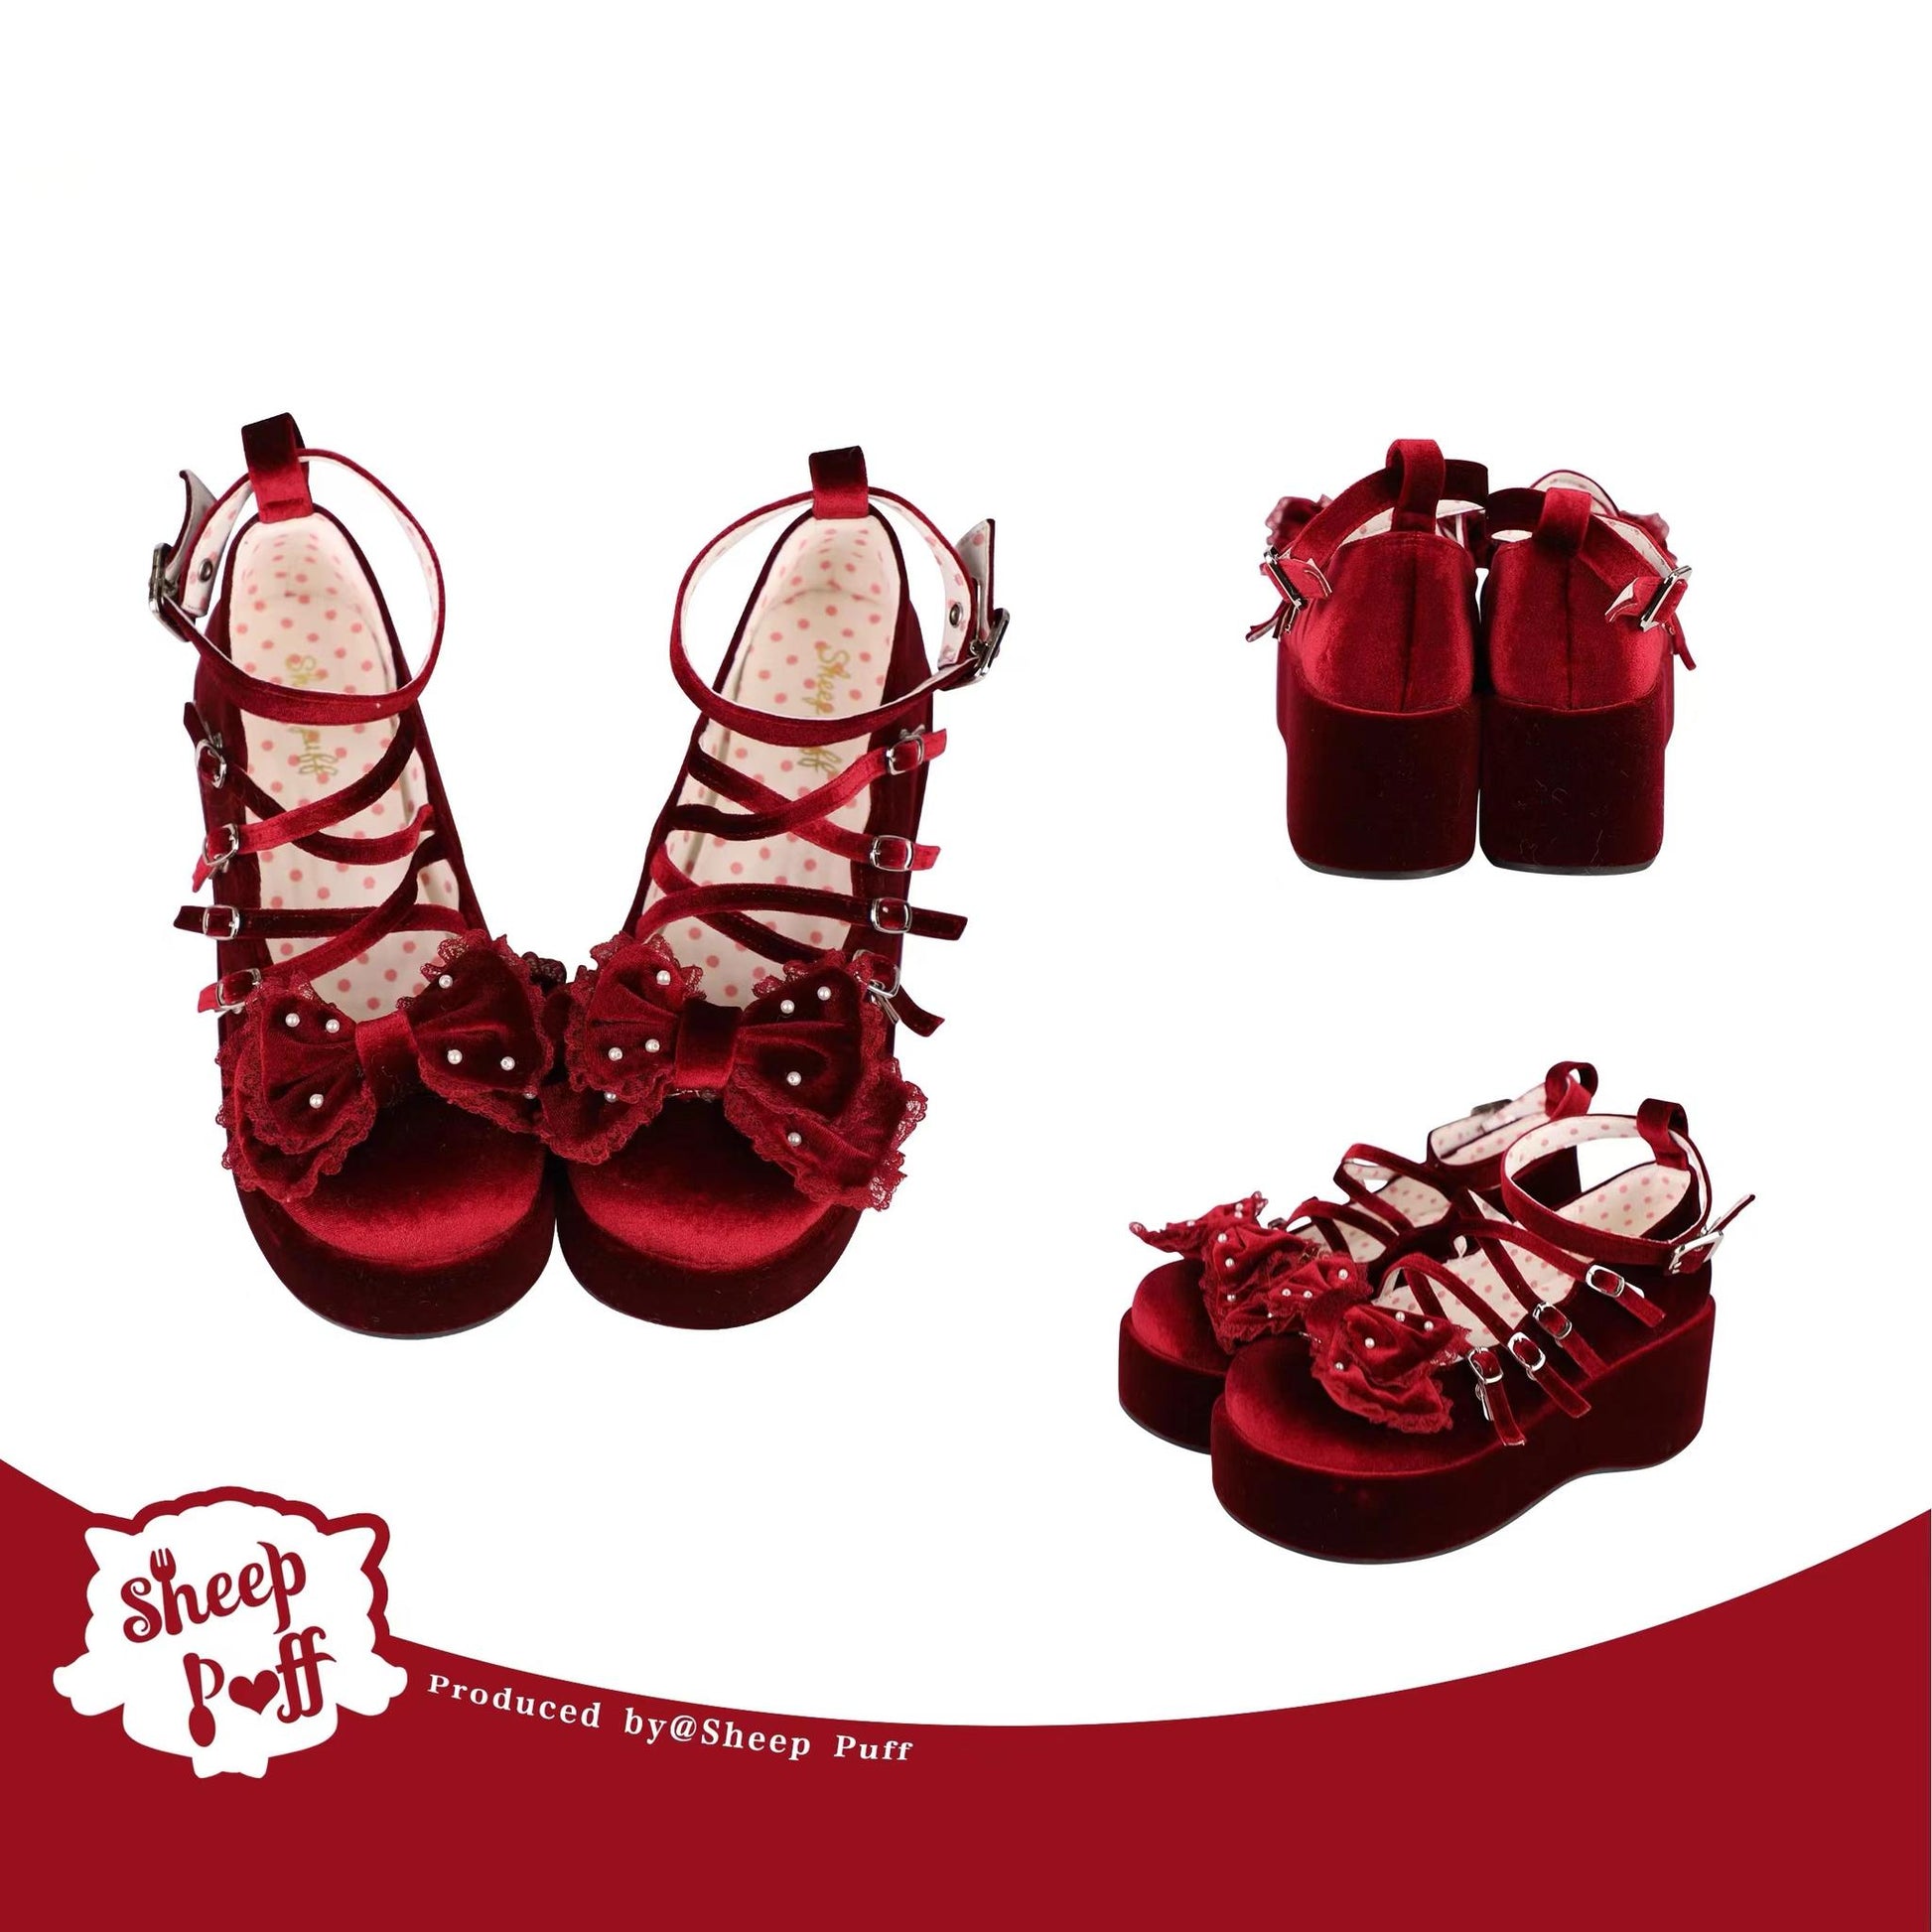 Lolita Shoes Velvet Platform Shoes Lace-up Mary Jane Shoes (Red / 34 35 36 37 38 39 40 41) 37022:544036